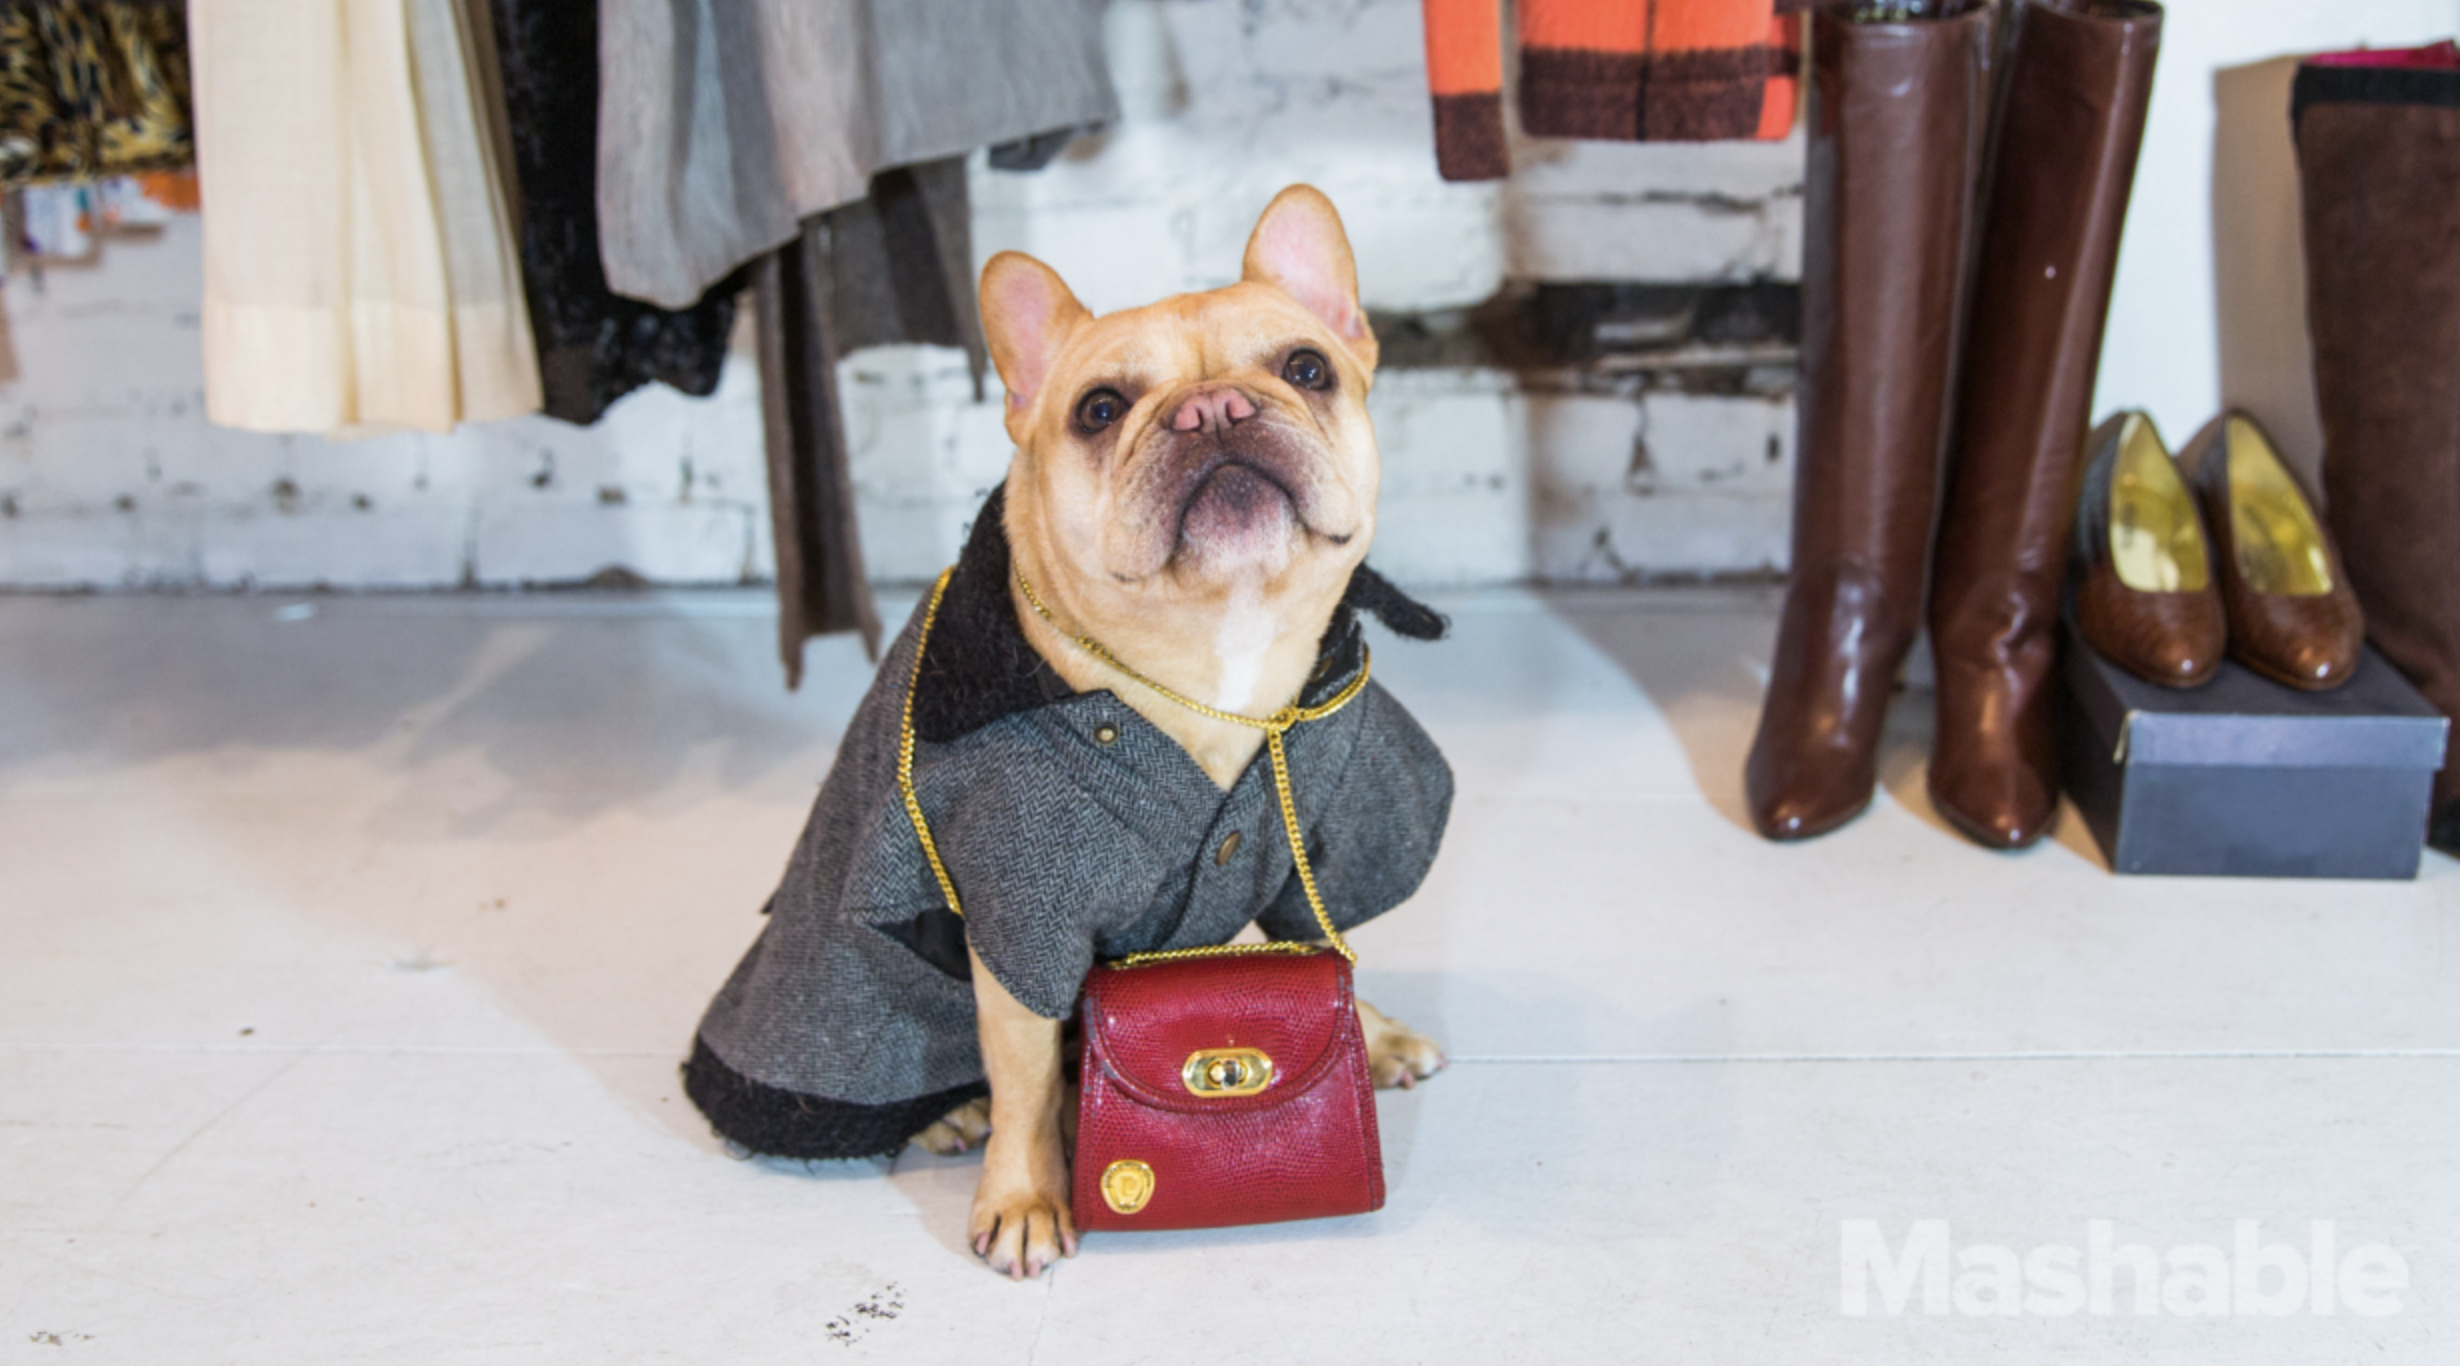 A NYFW interview with Luella, the 'Fashion Frenchie'